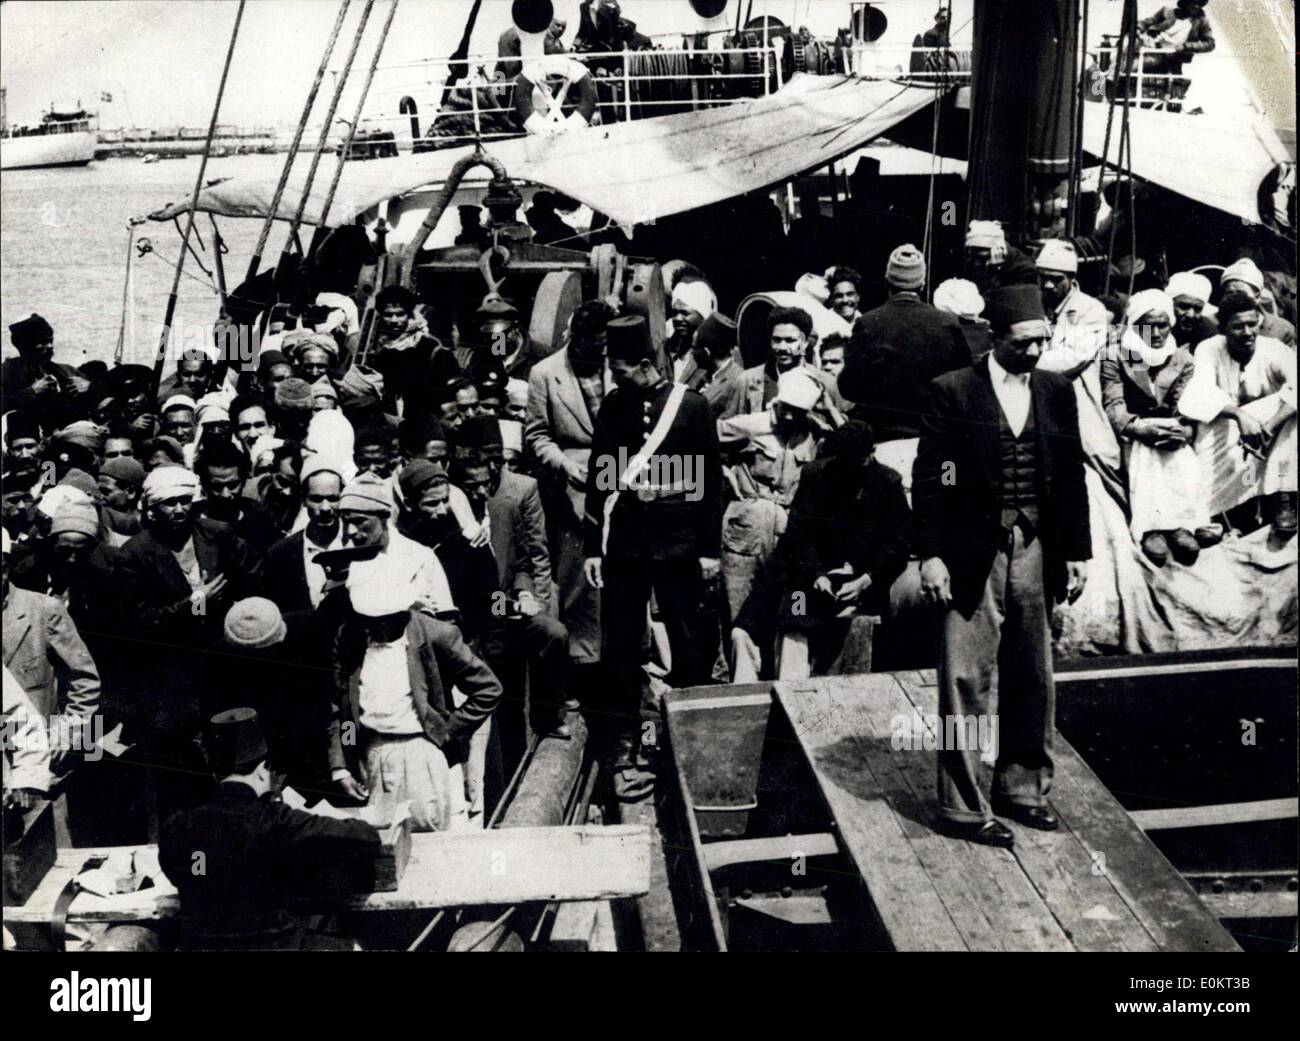 May 03, 1948 - Refugees From Haifa - 700 Refuges from Haifa Recently Arrived at Port Said, where the Egyption Government took all necessary steps to feed and provide accomodation for the fleeing mass - Keystone Photo Shows - Refuges Aboard their ship prior to disembarking at Port Said, after Fleeing from Haifa. Stock Photo